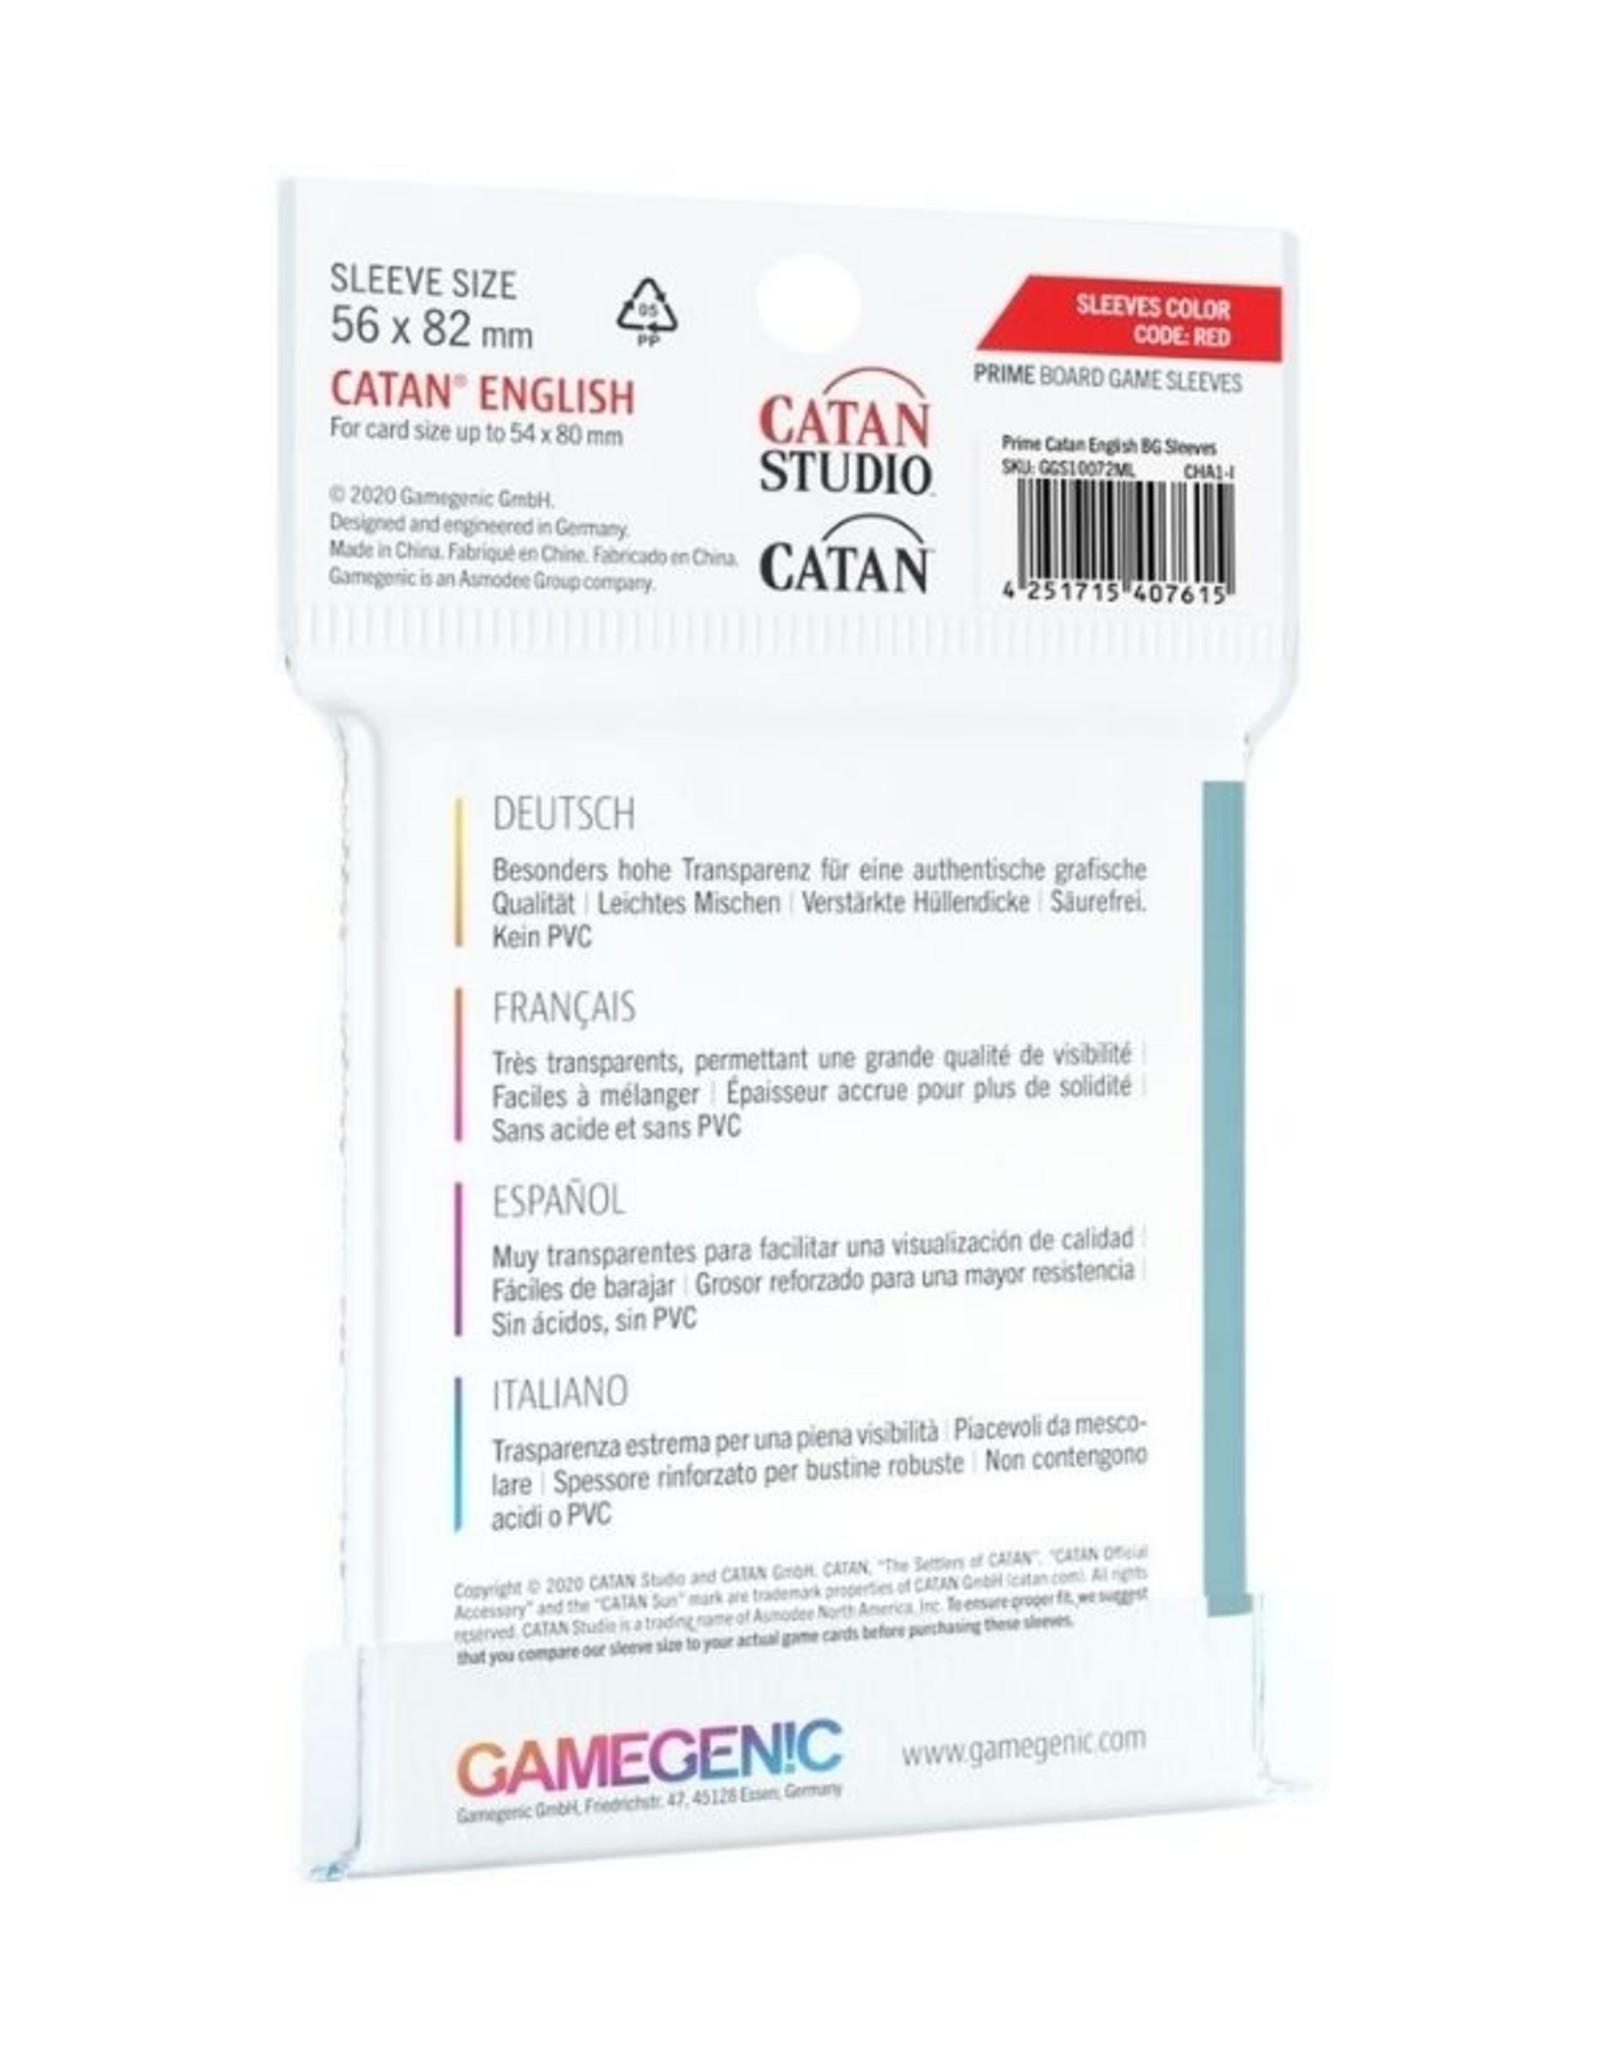 Gamegenic Catan-Sized Sleeves MATTE (56 x 82 mm, 60ct)